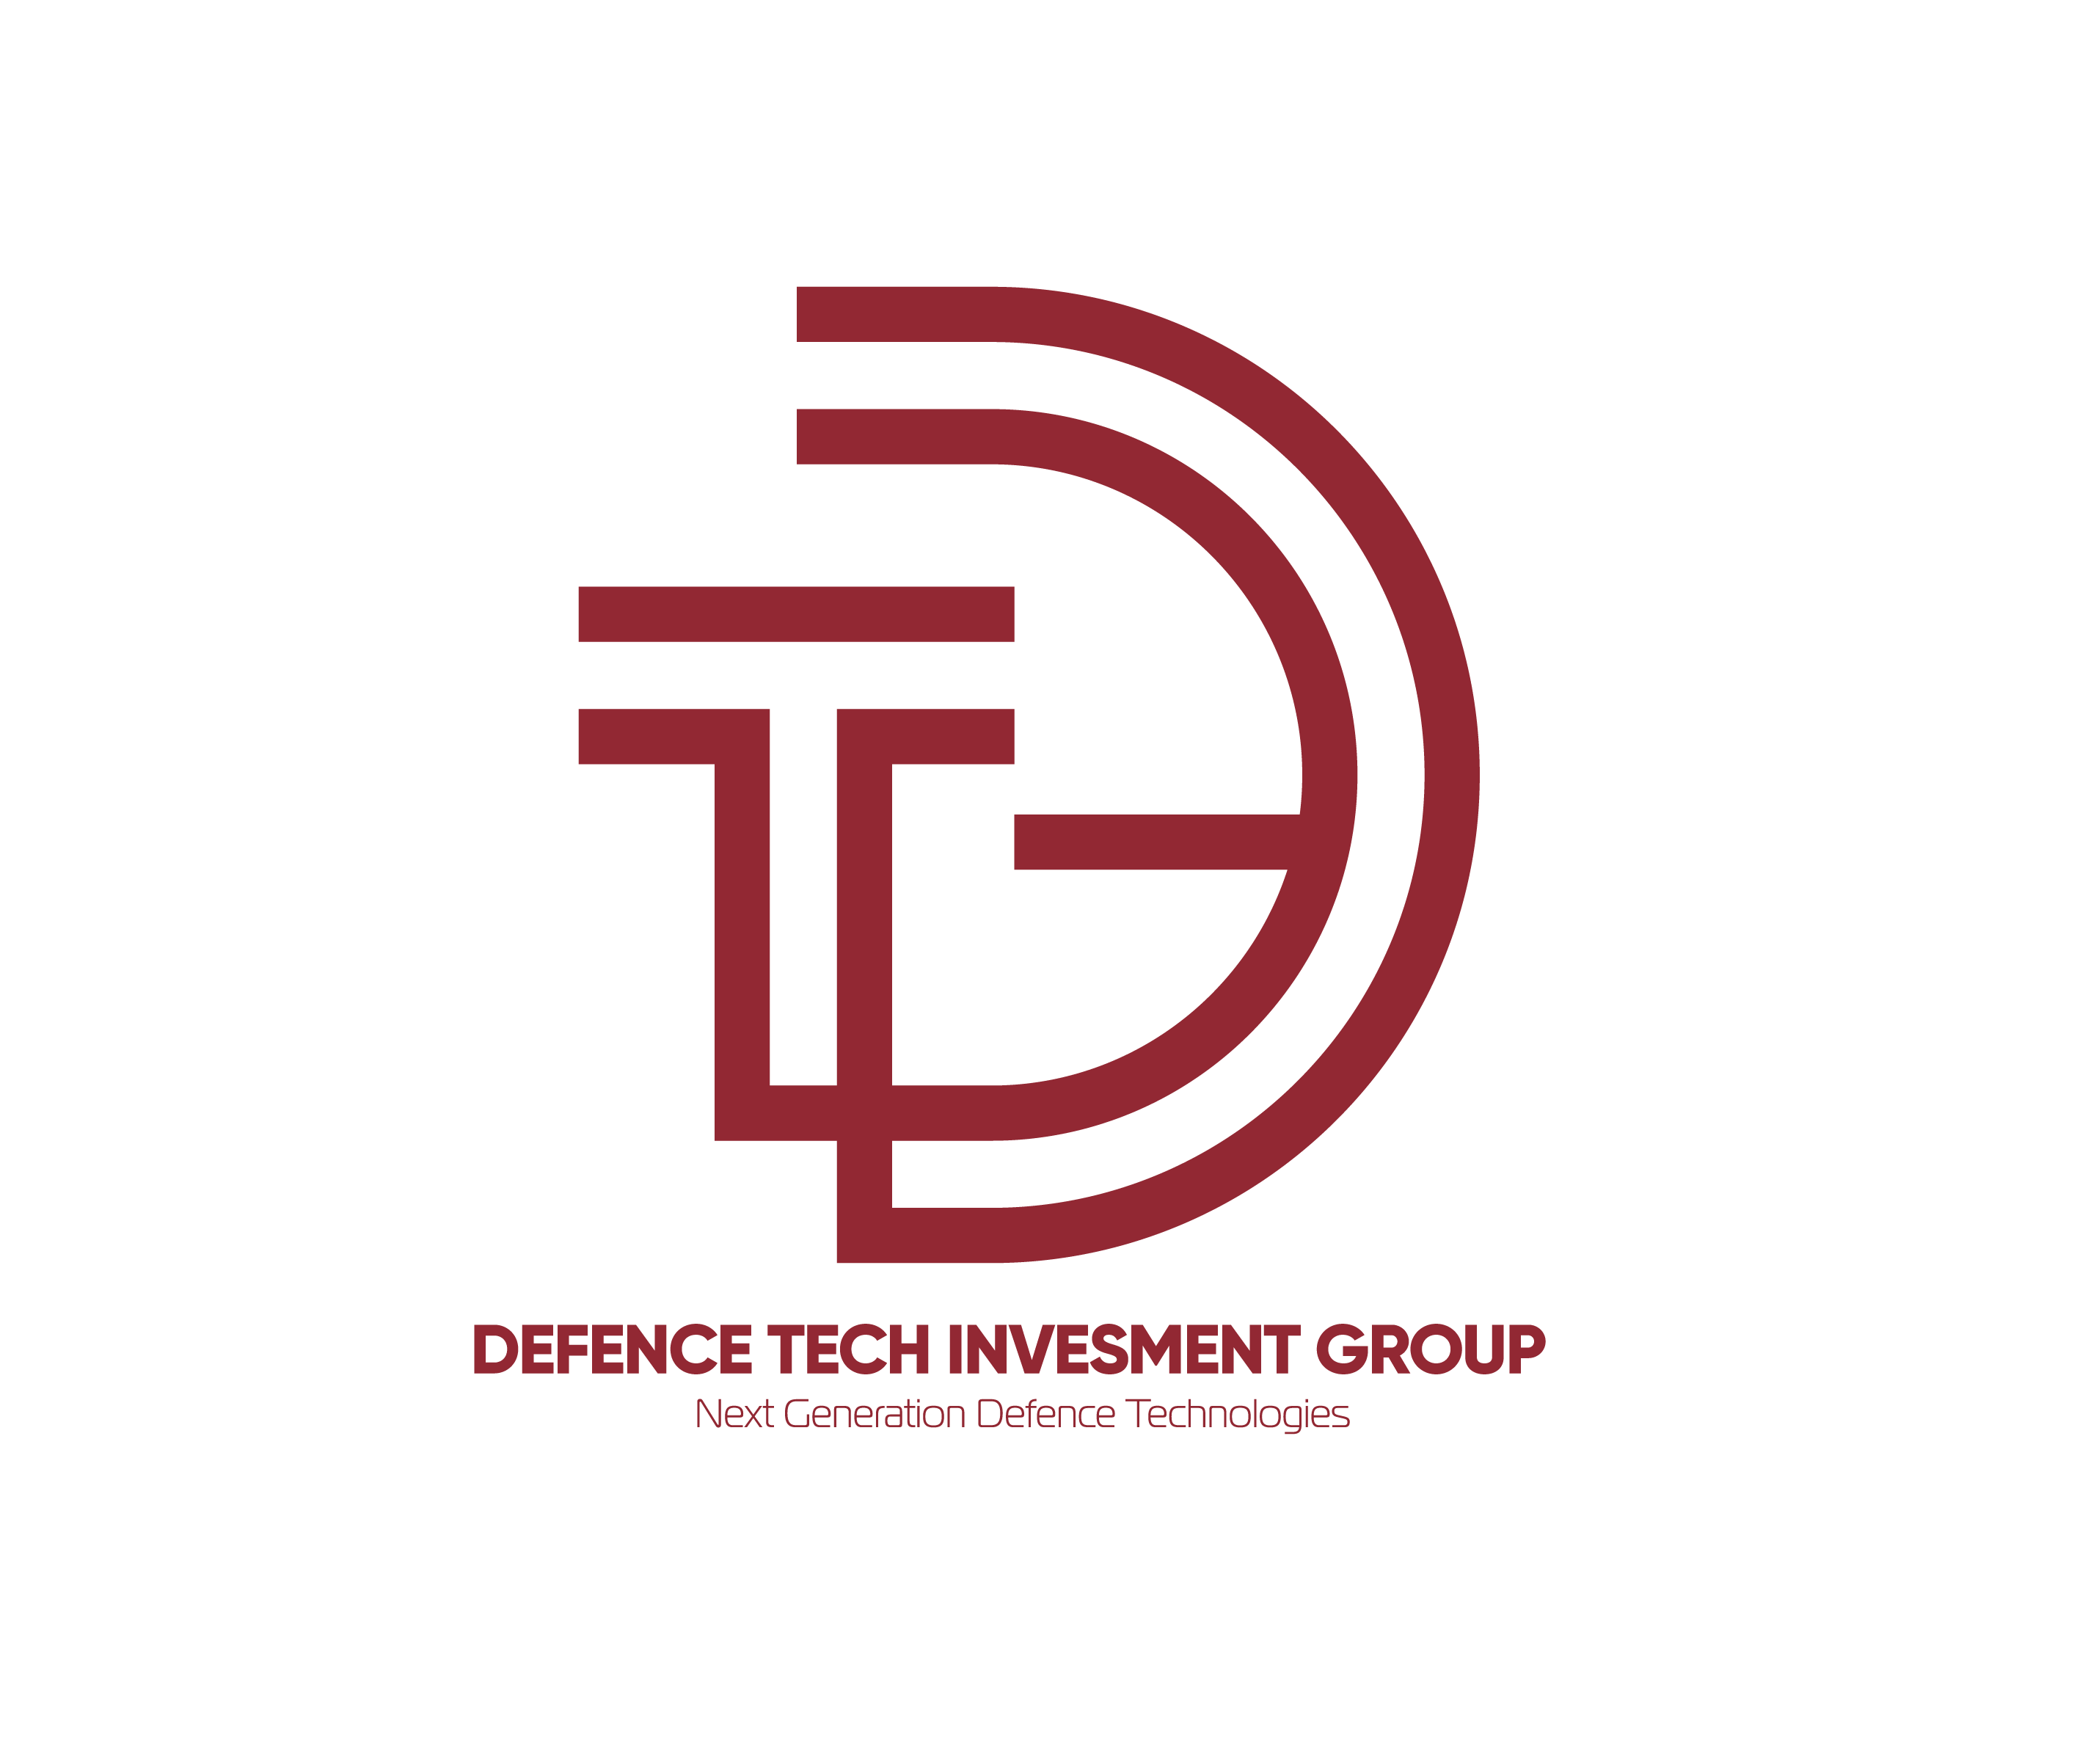 DEFENCE TECH INVESMENT GROUP